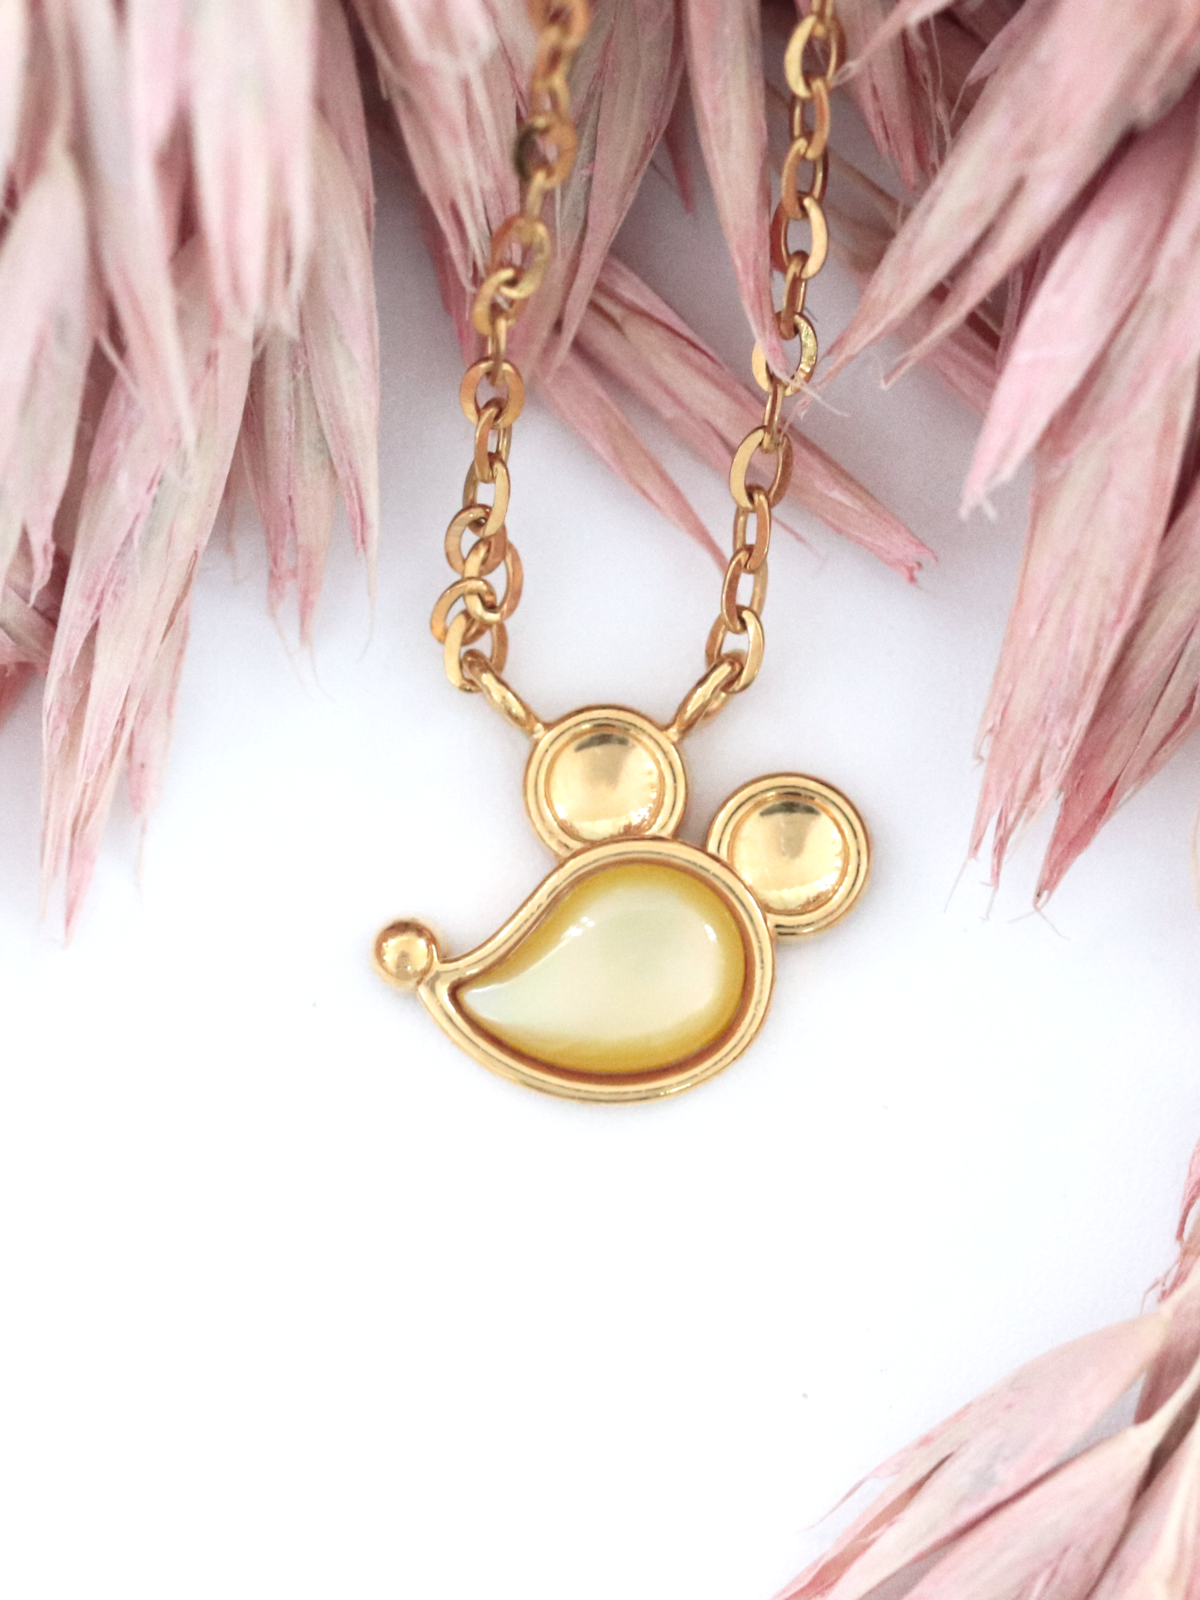 Prismatic Rat Necklace in Yellow